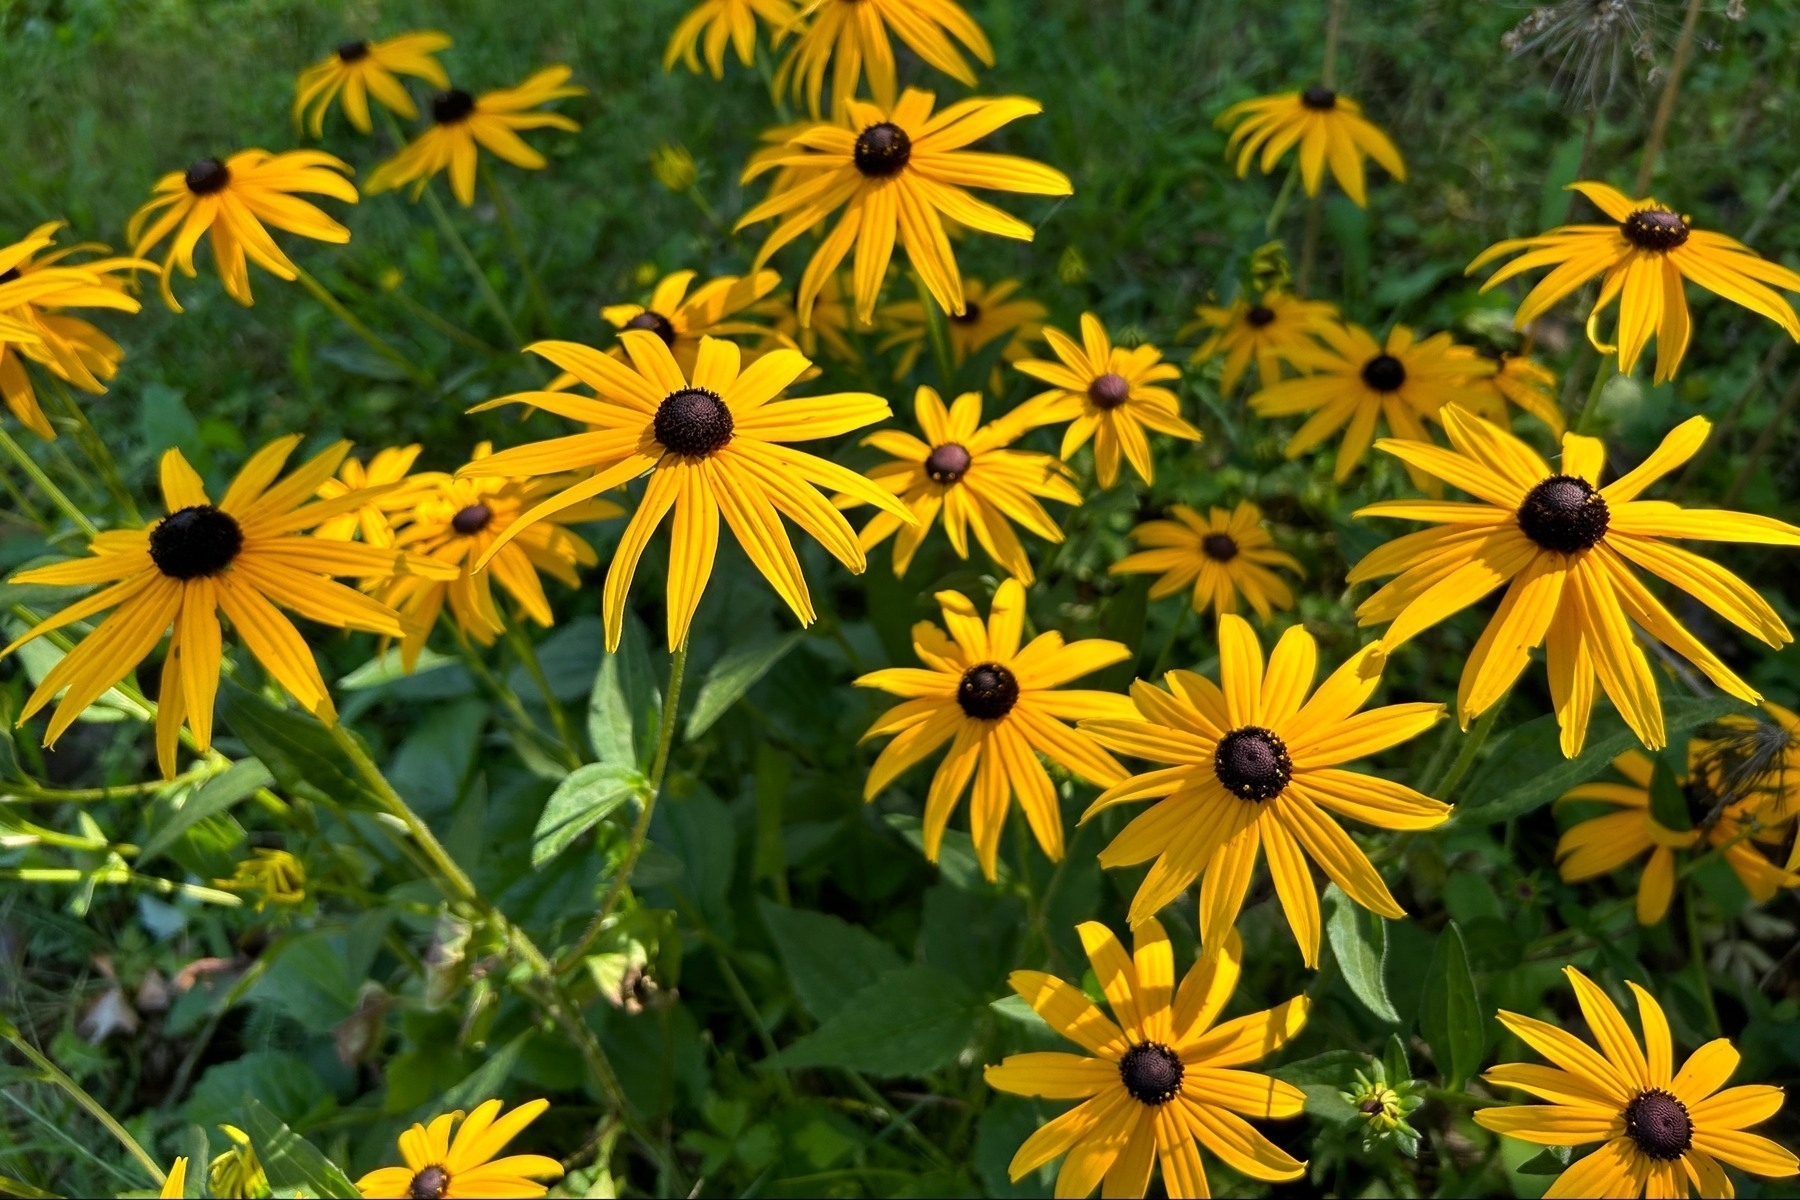 Multiple Black-eyed Susan flowers that are burger yellow with green grass out of focus behind them.